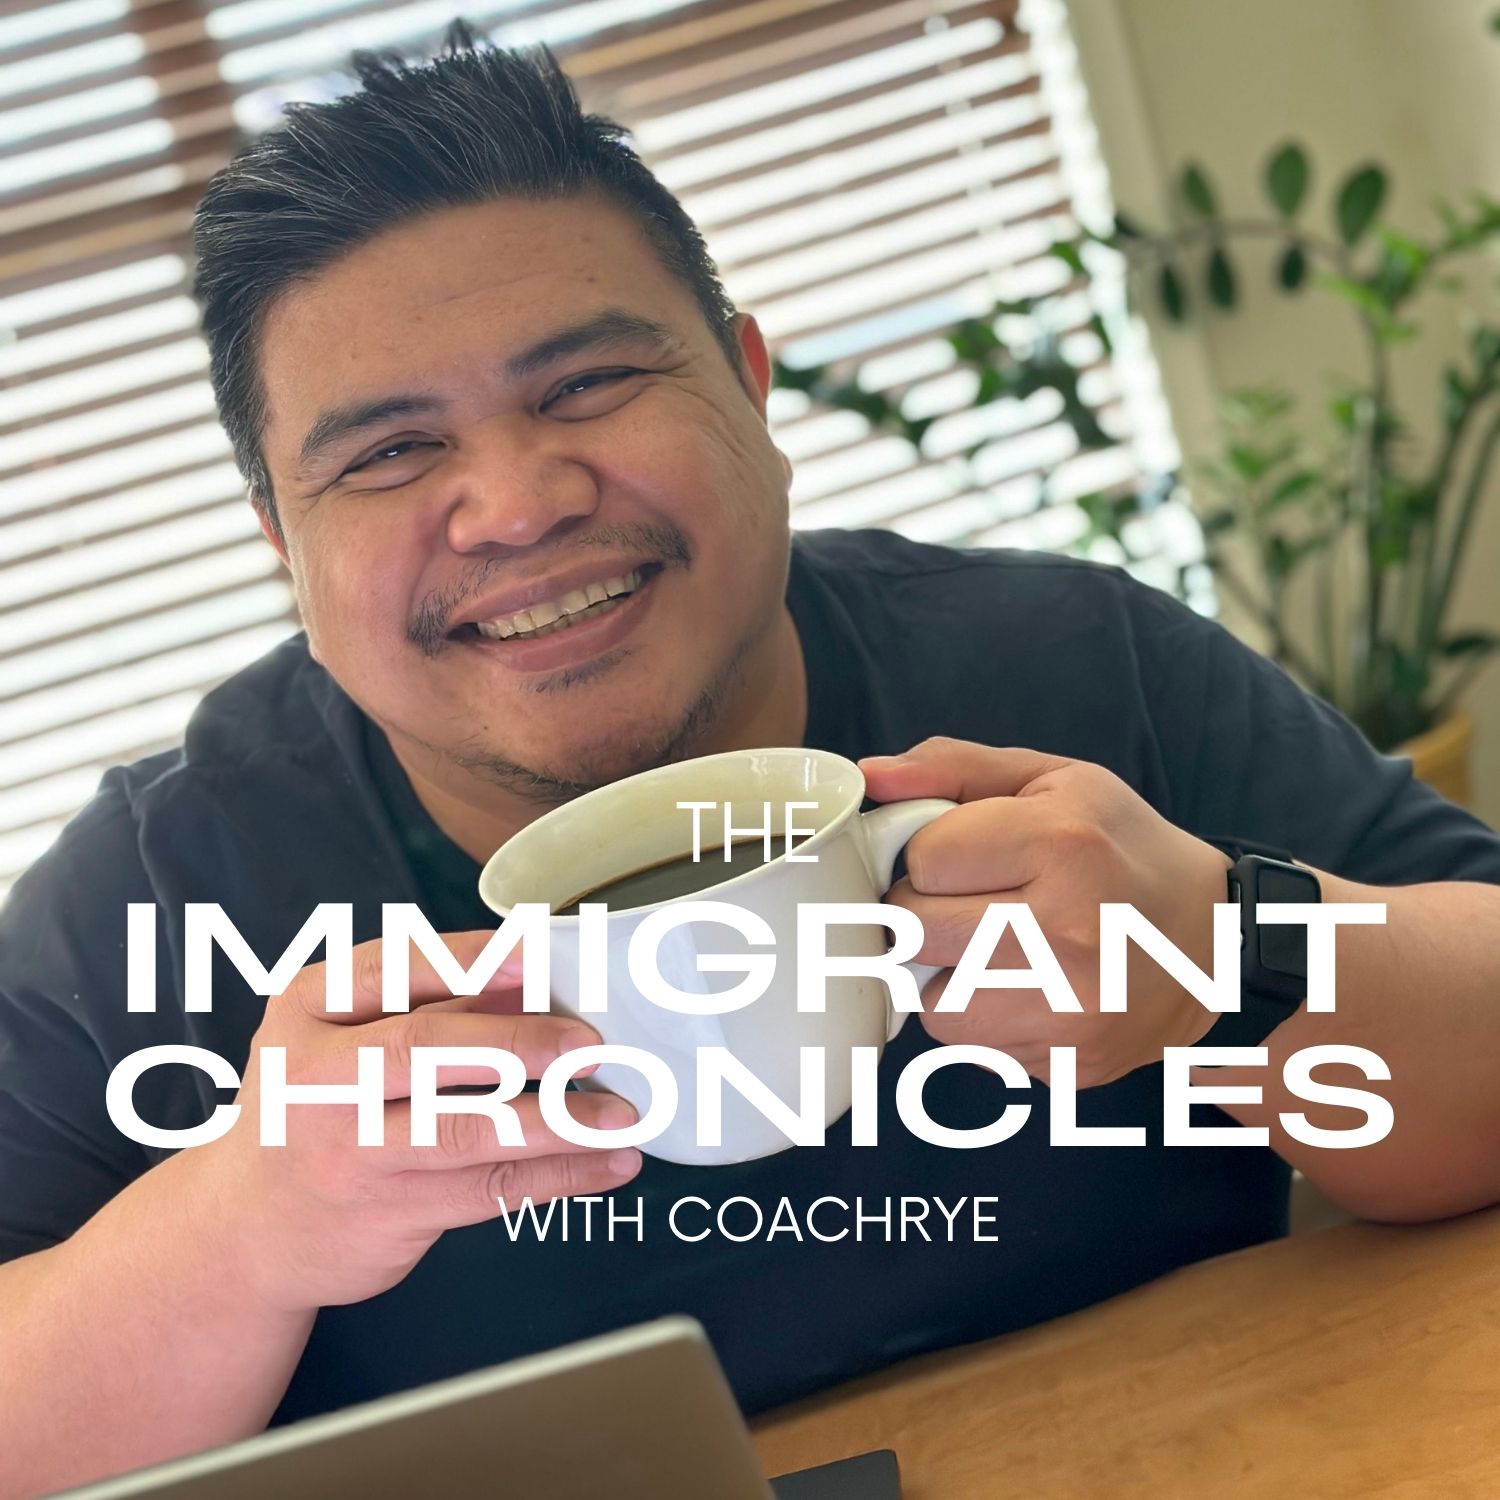 Welcome to The Immigrant Chronicles